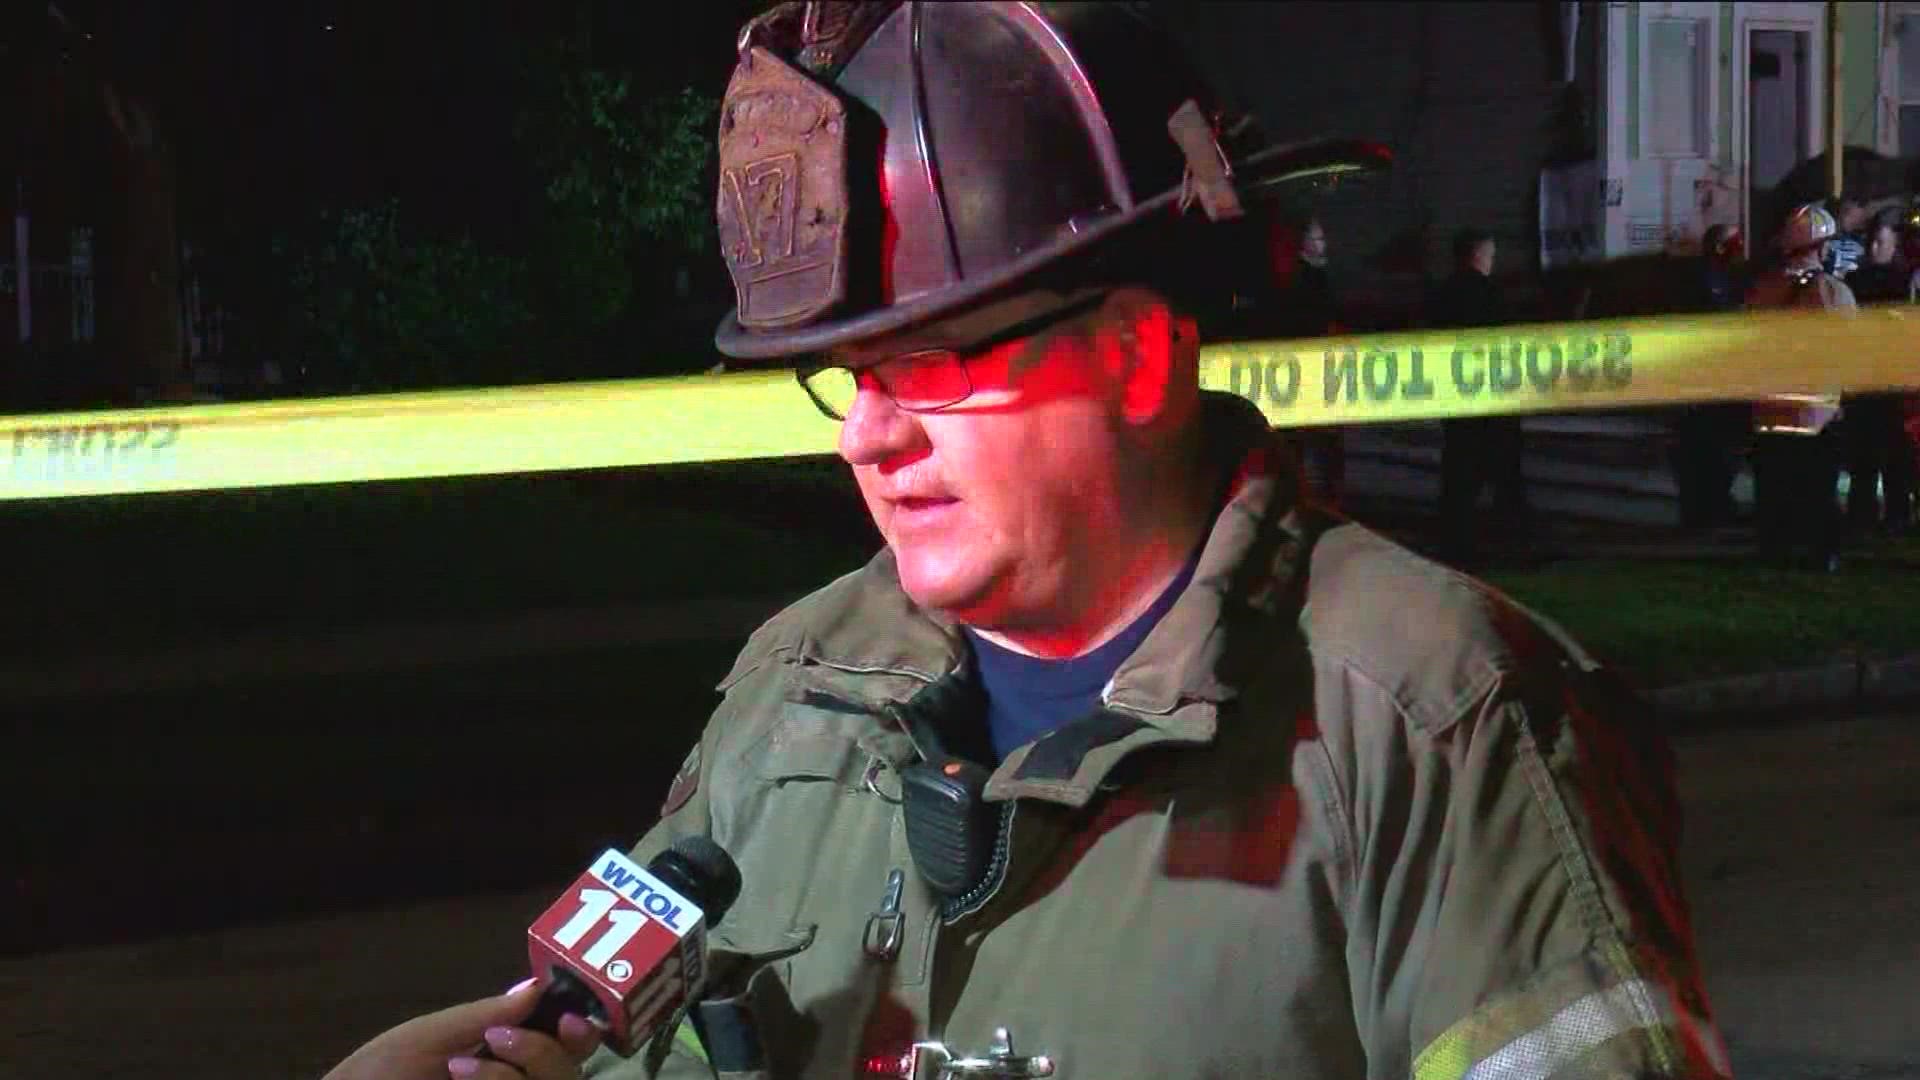 Toledo Fire & Rescue private explains the situation